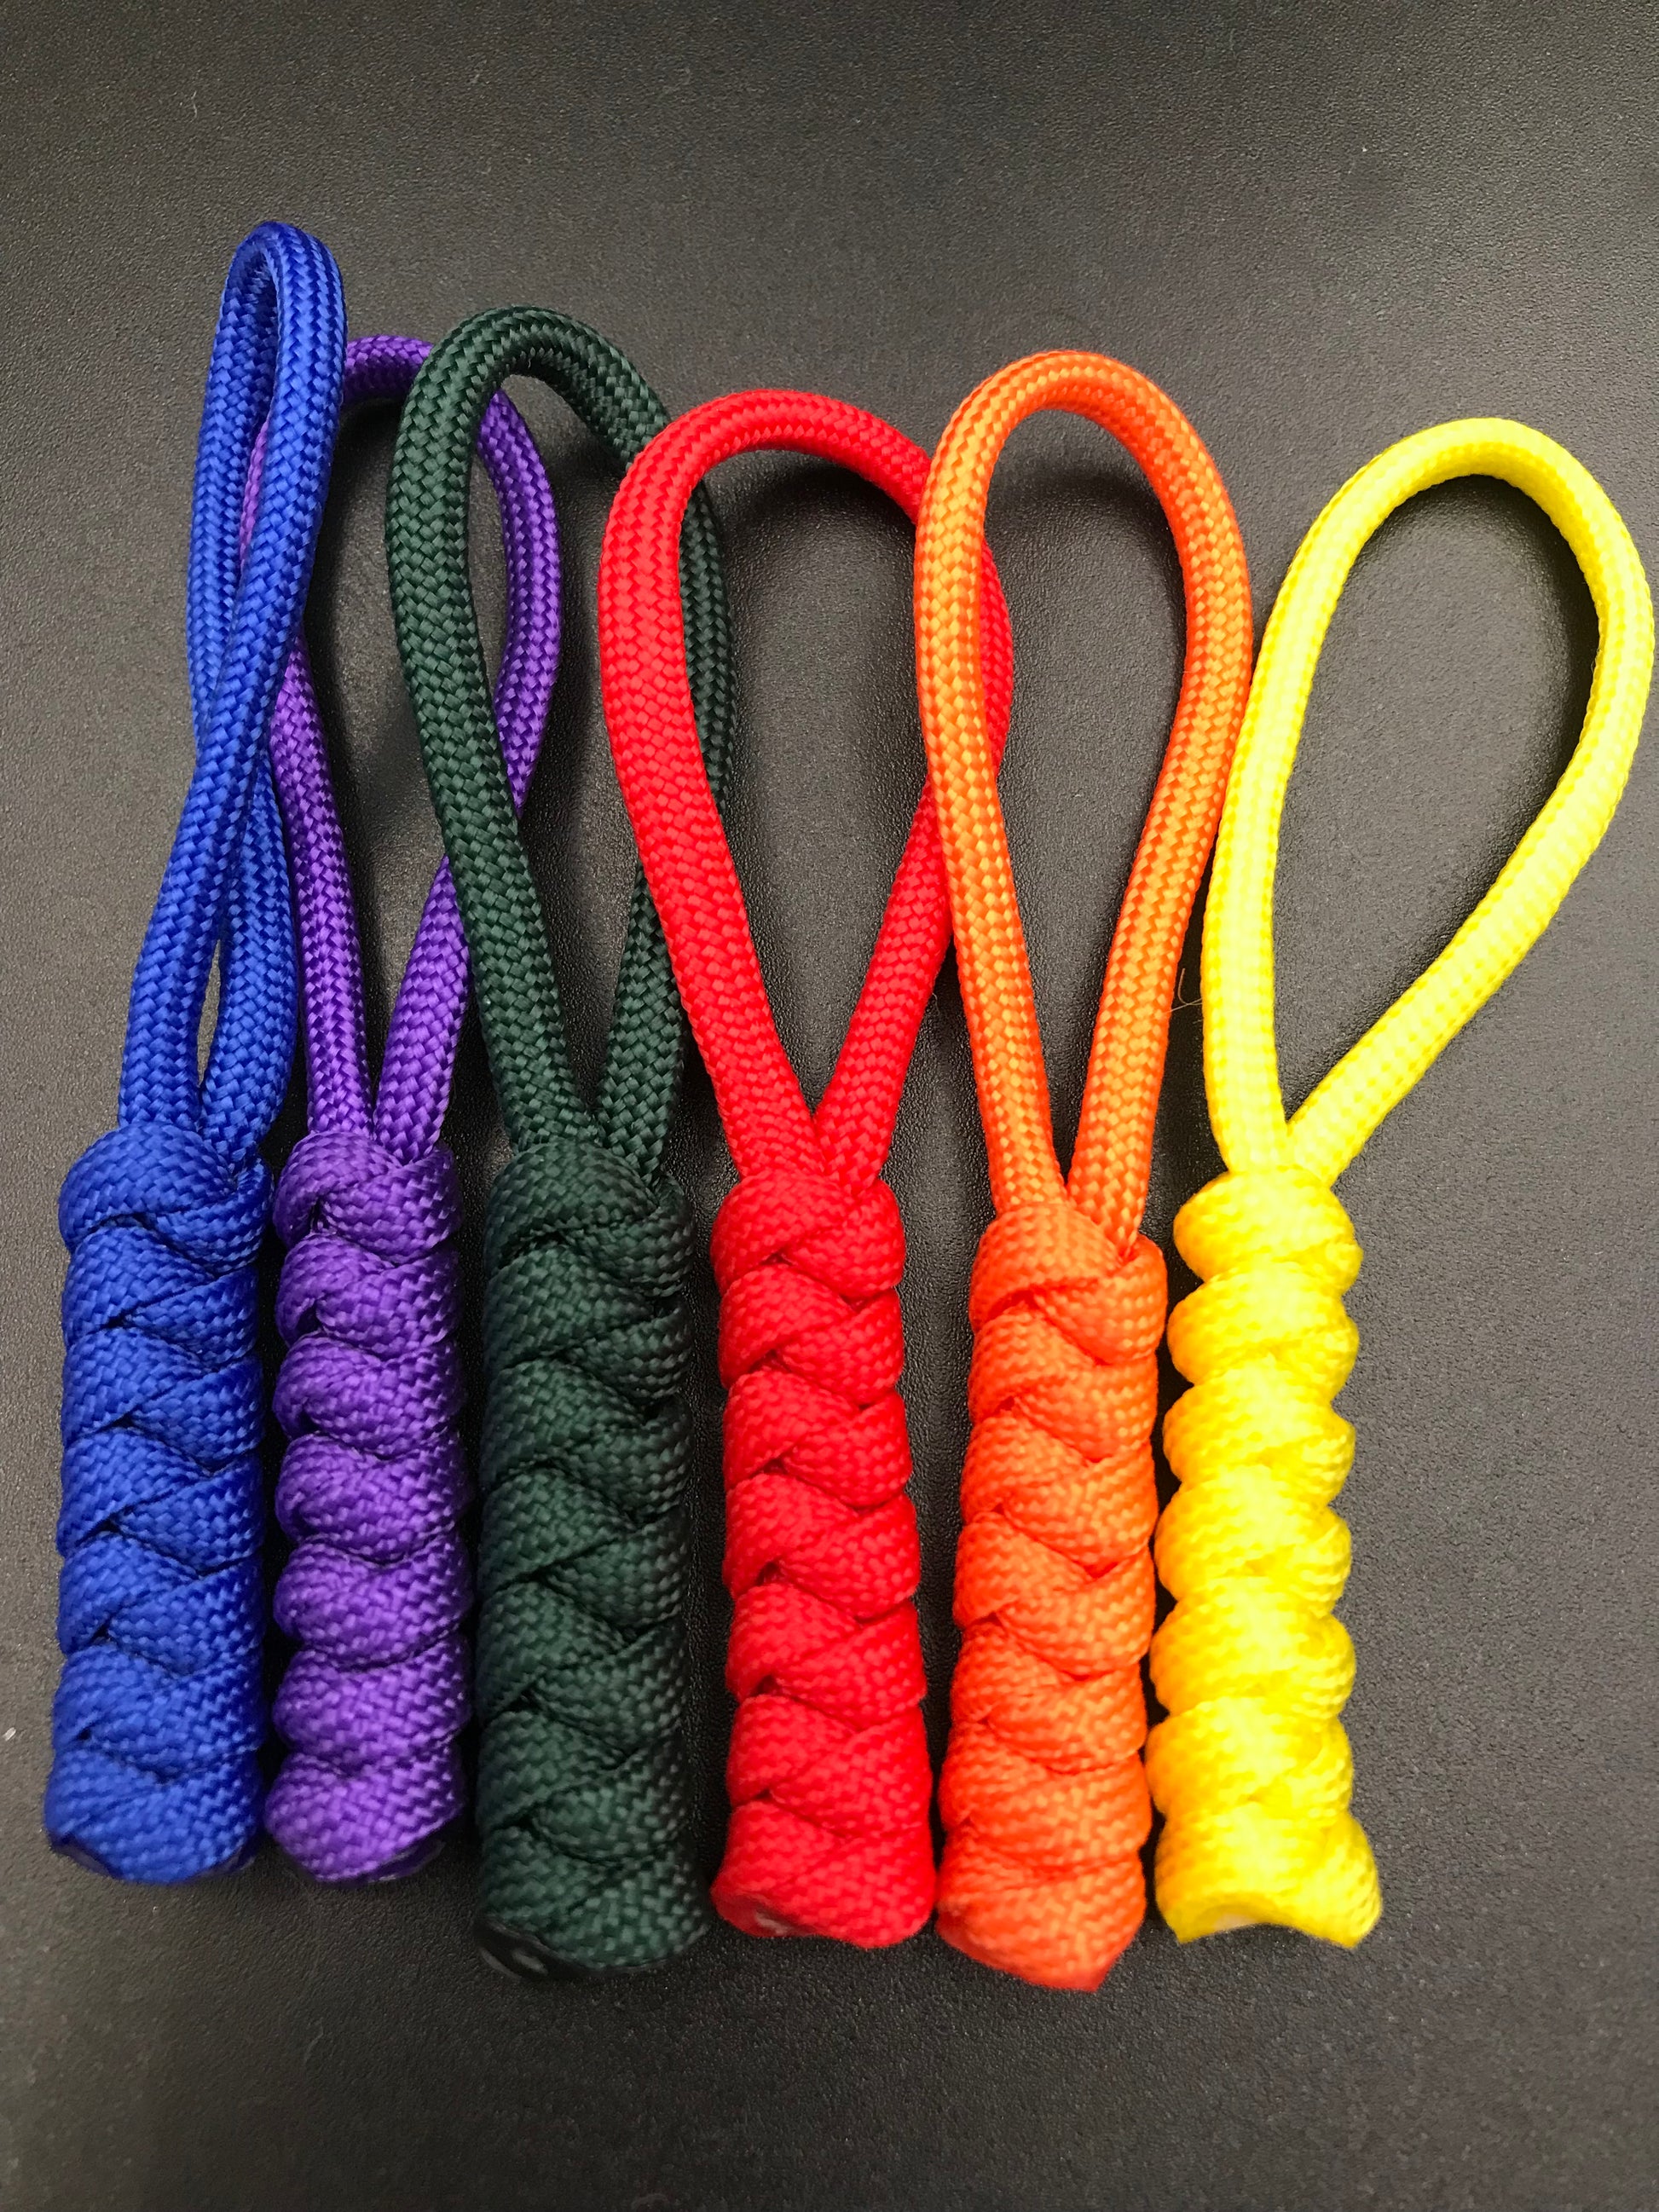 Paracord Zipper-Pull with Diamond Knot - Survival Colorful Luggage Identity  Zipper Assist